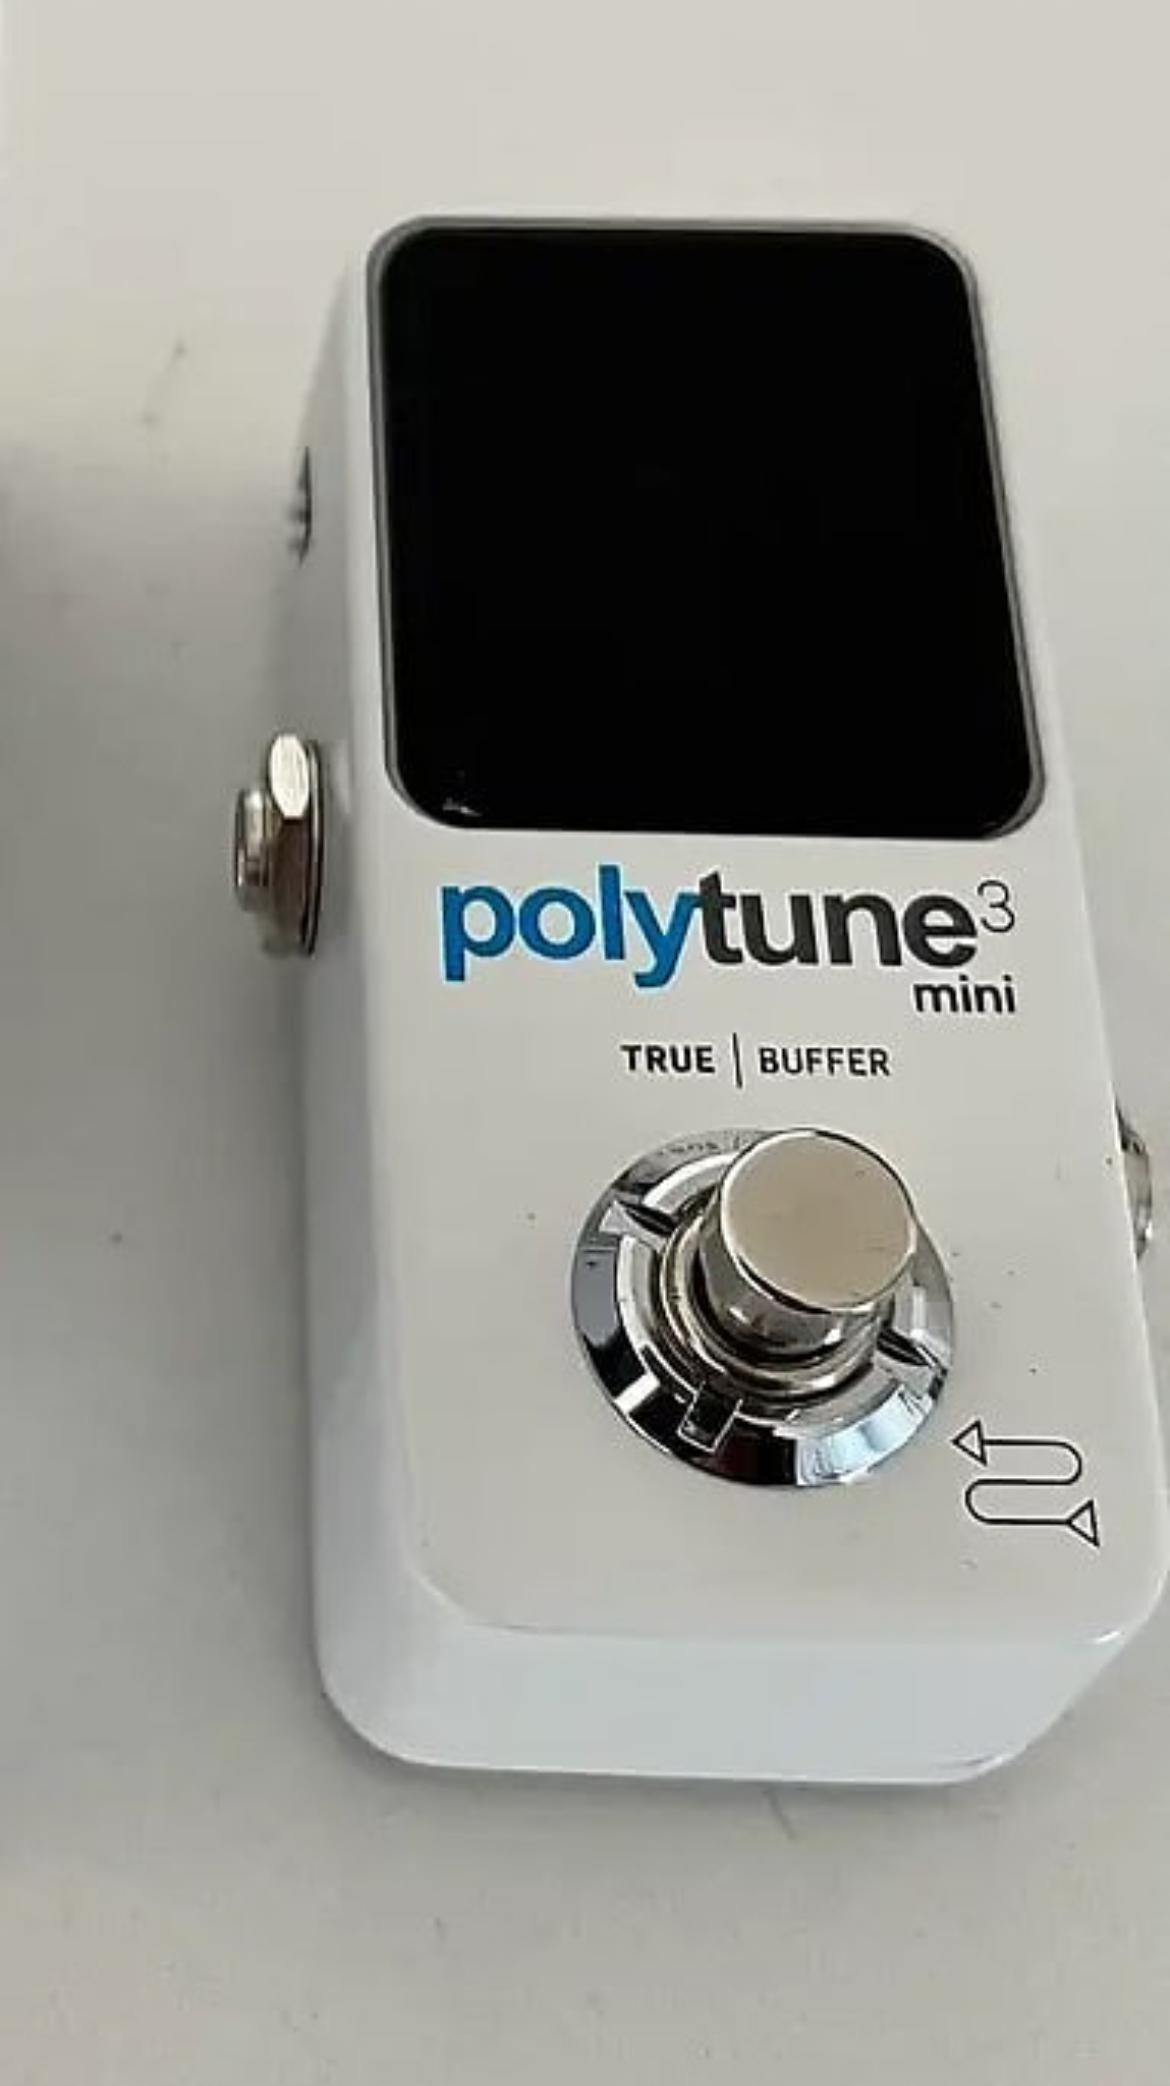 Used TC Electronic PolyTune 3 Mini - Sweetwater's Gear Exchange